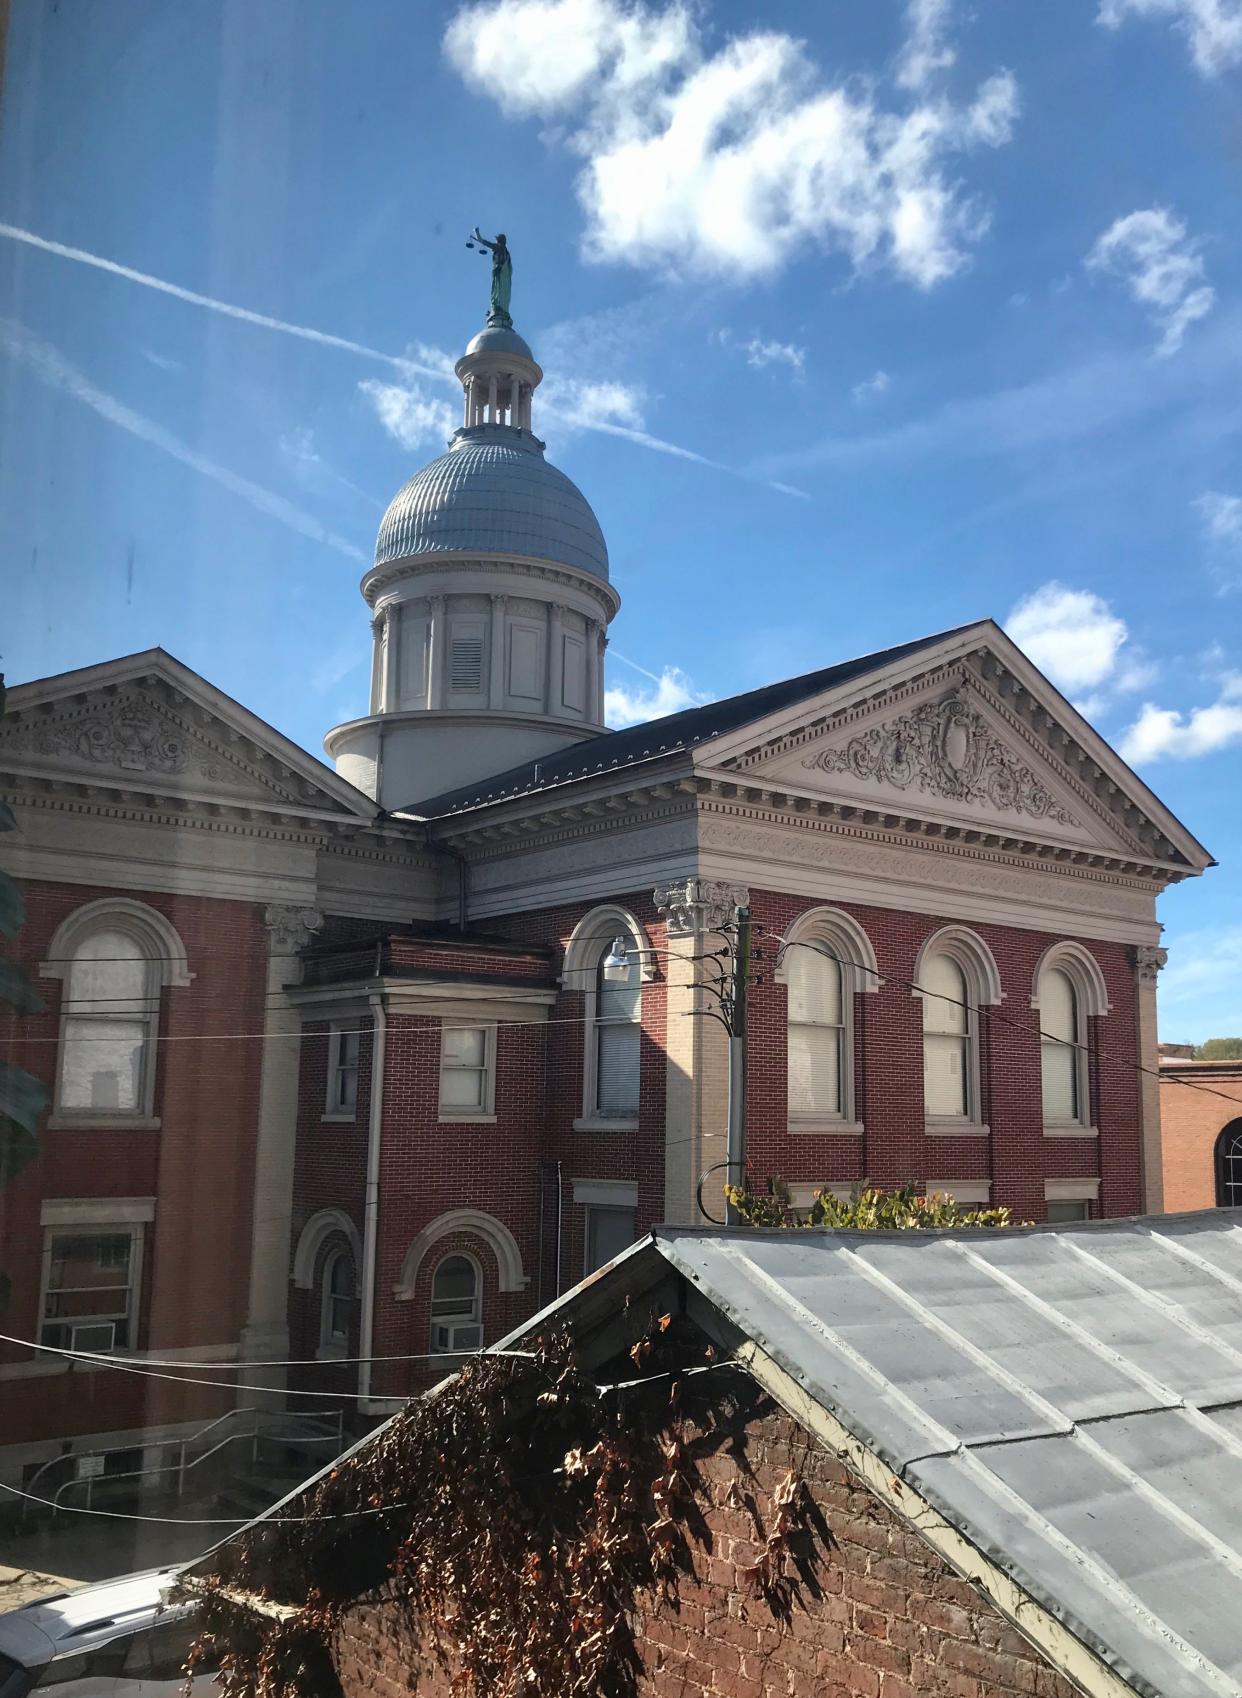 The view of the Augusta County Courthouse from inside Kimberly West's home on 17-19 Barristers Row in Staunton on Sunday, Oct. 18, 2020.